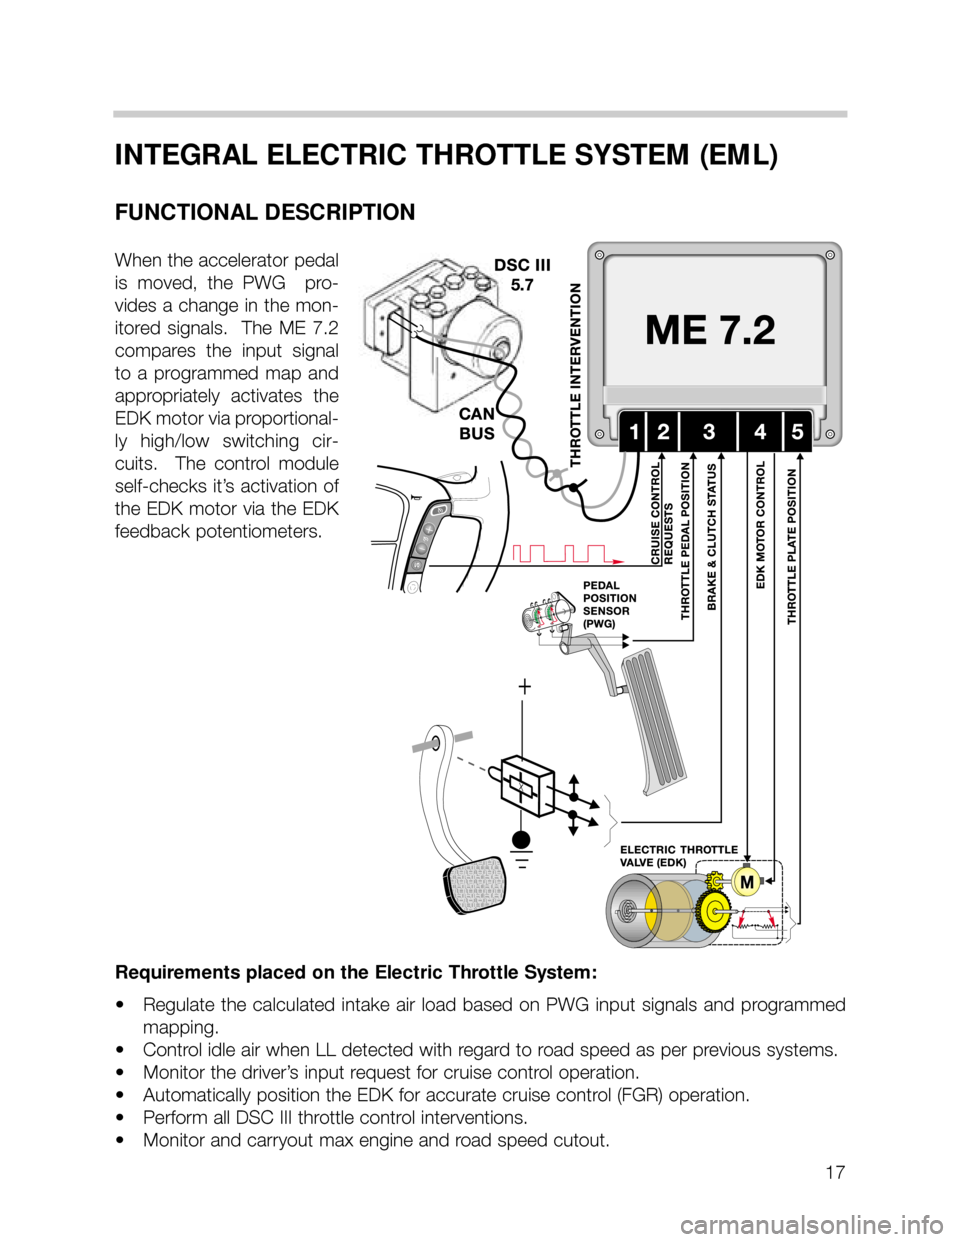 BMW X5 2001 E53 M62TU Engine Workshop Manual 17
INTEGRAL ELECTRIC THROTTLE SYSTEM (EML)
FUNCTIONAL DESCRIPTION
When the accelerator pedal
is  moved,  the  PWG    pro-
vides a change in the mon-
itored  signals.    The  ME  7.2
compares  the  inp